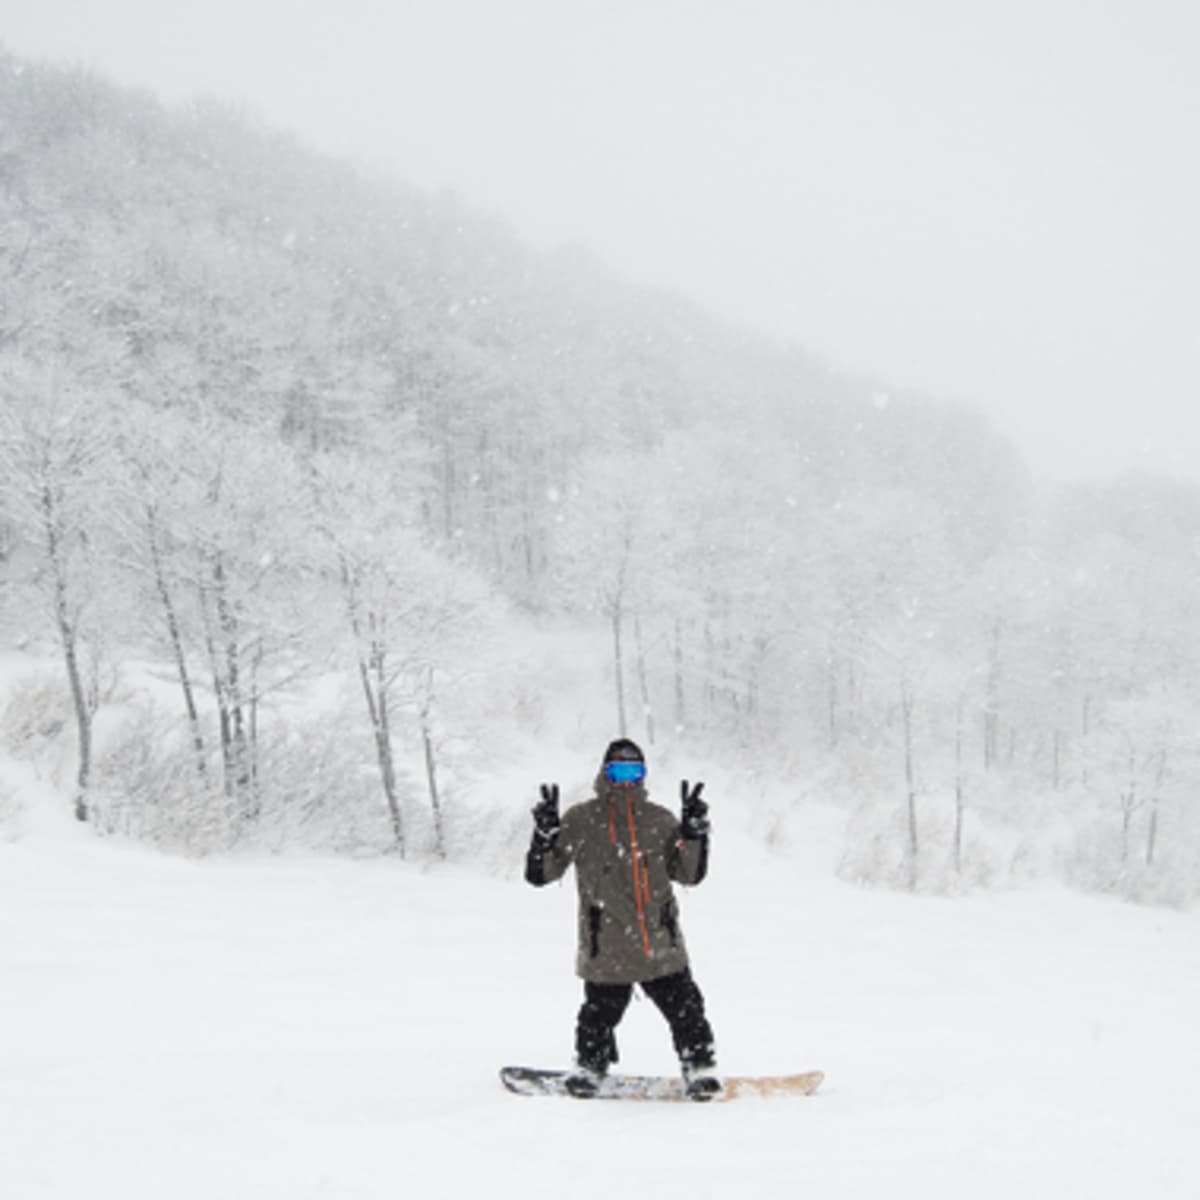 Snowboarding In Japan With Mick And Wilko